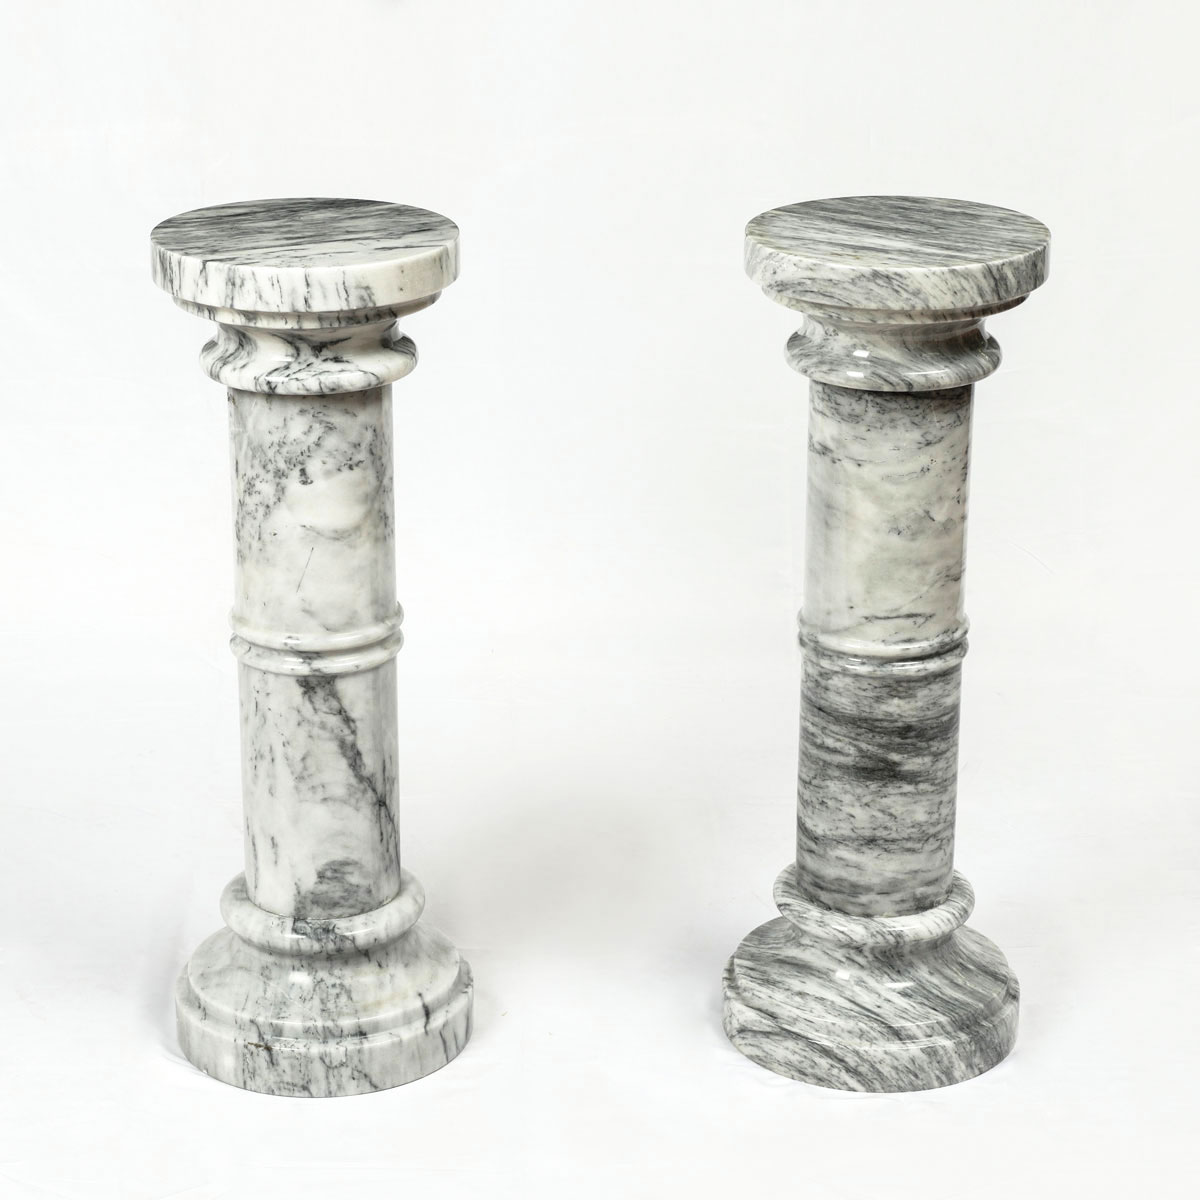 PAIR OF TURNED MARBLE PEDESTALS: